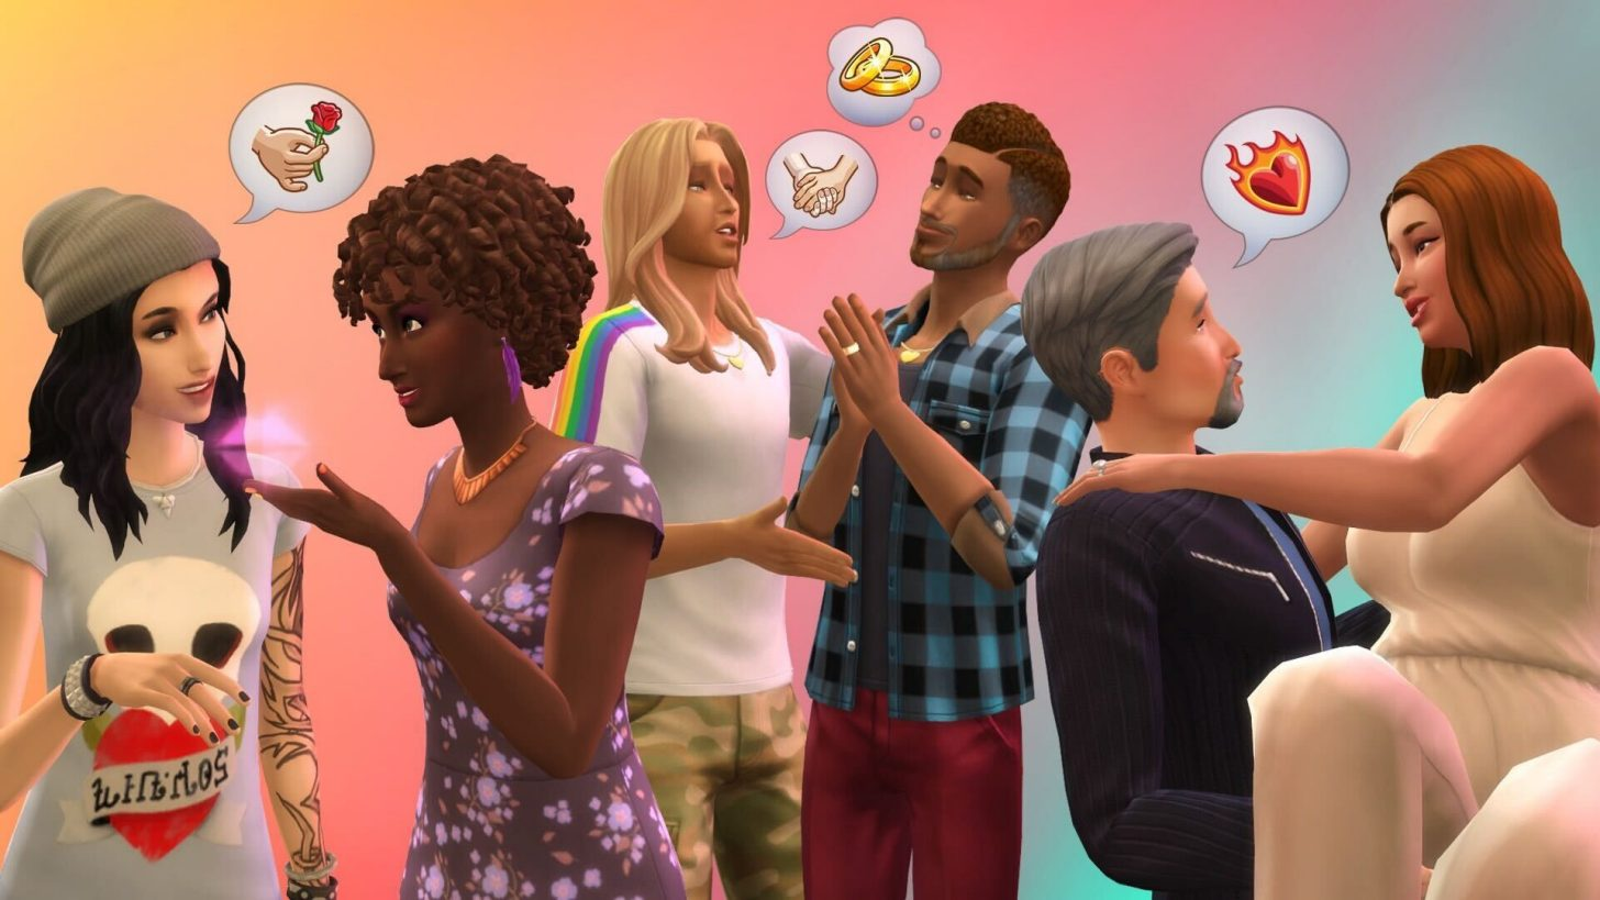 The Sims 4 Will Be Free To Download On All Platforms Starting Next